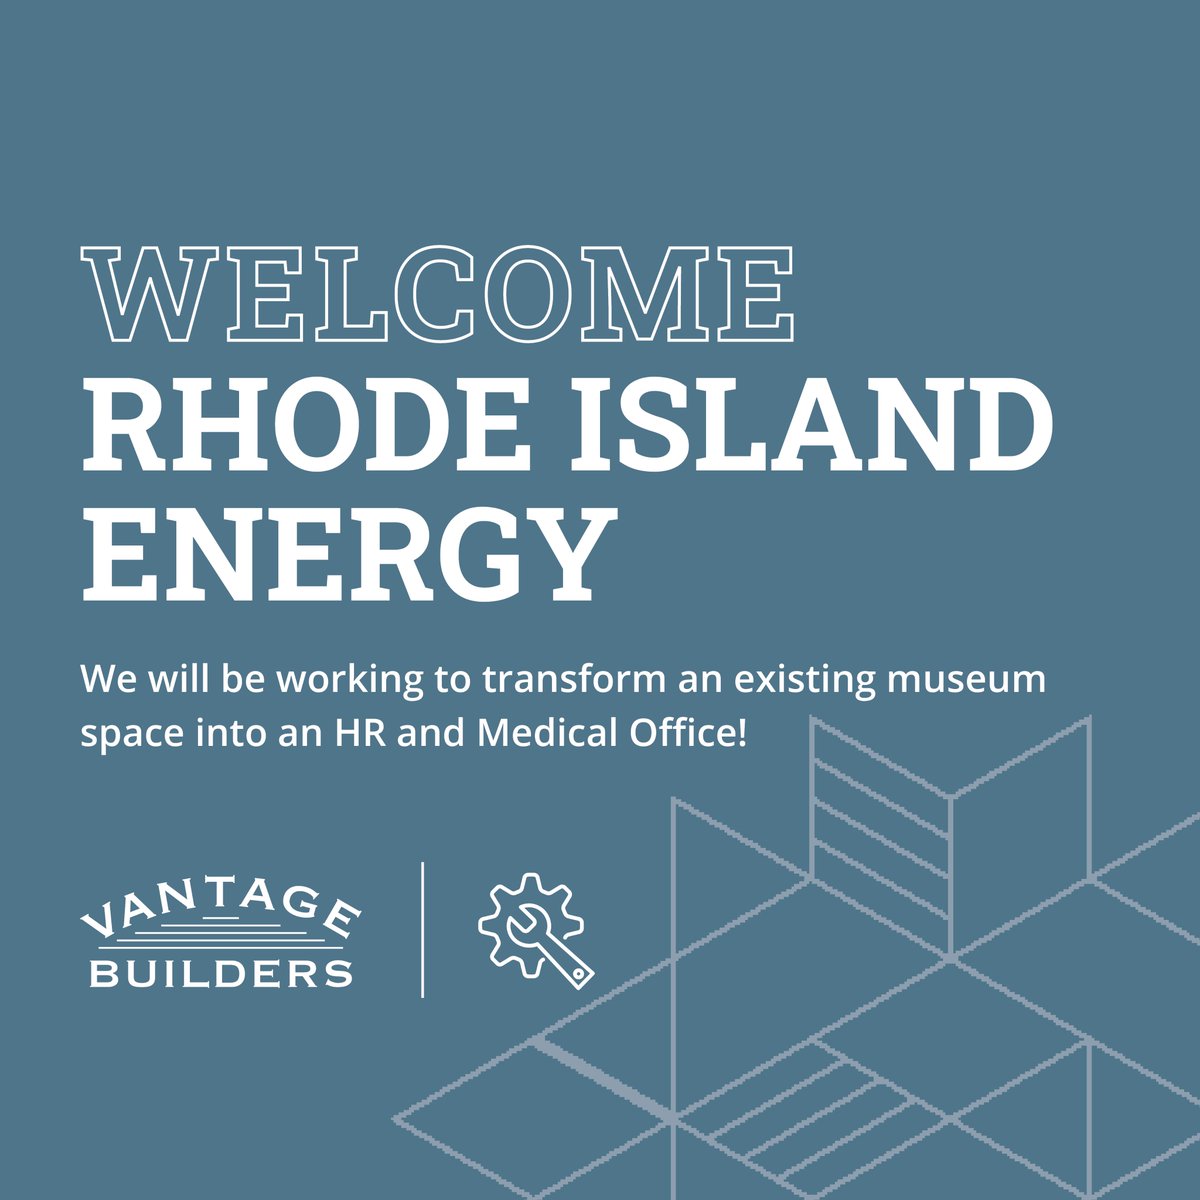 Happy #WelcomeWednesday to #RhodeIslandEnergy! We will be working to transform an existing museum space into an HR and Medical Office! Keep an eye out for updates on this project!
#WeBuildSoYouCanMake #Industrial #Welcome #IndustrialConstruction